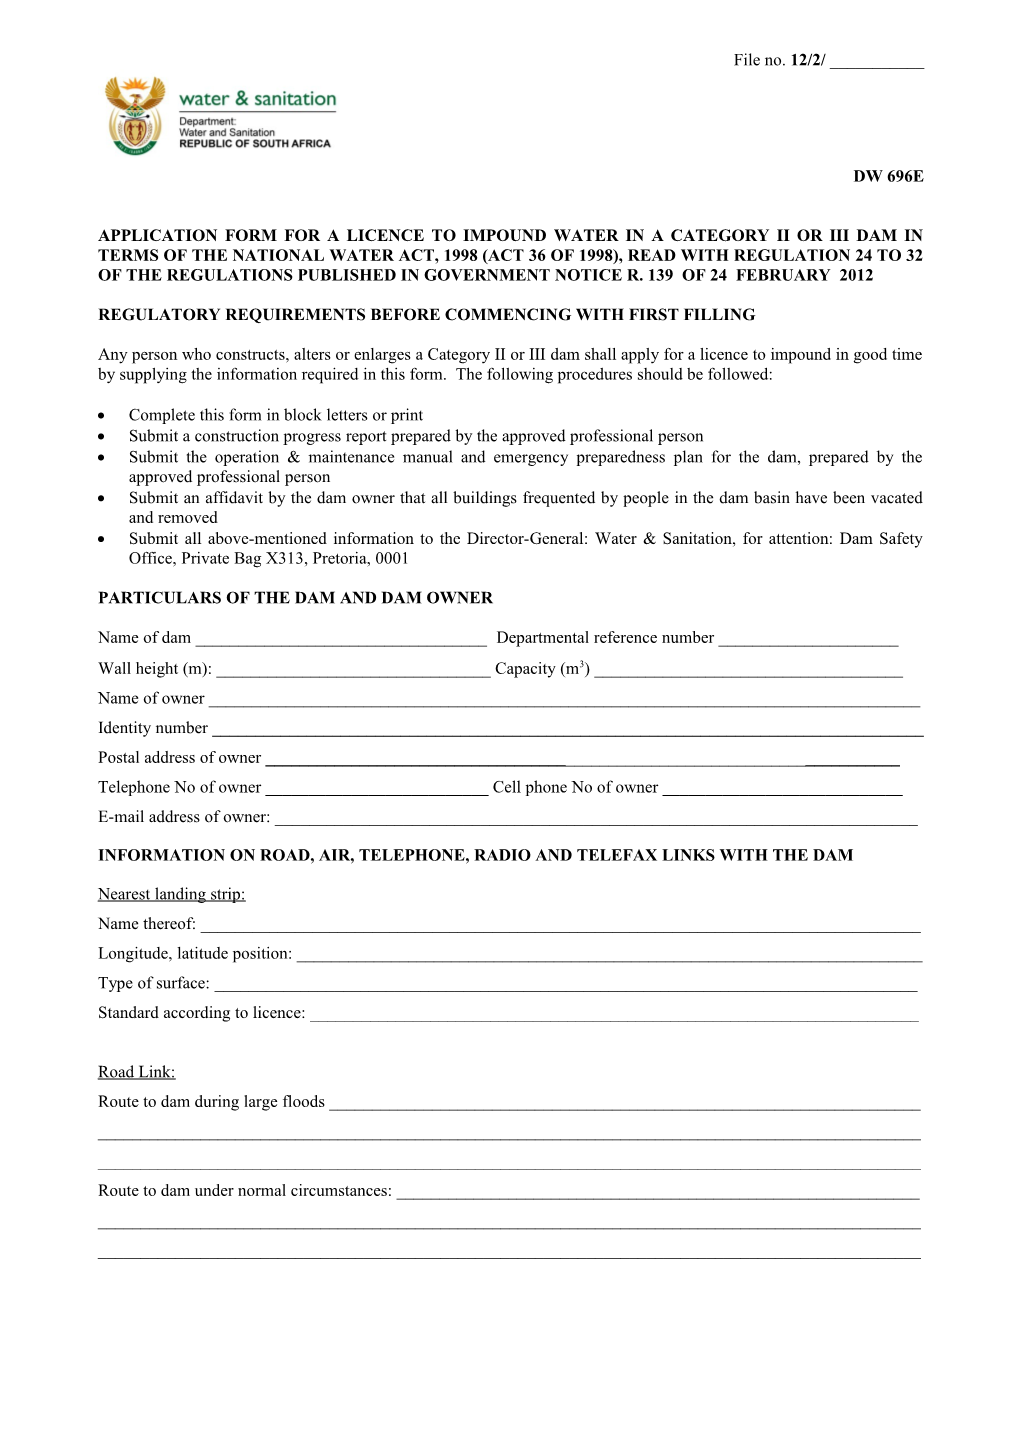 Application Form for a Permit to Construct, to Alter Or to Enlarge a Category Ii Or Iii